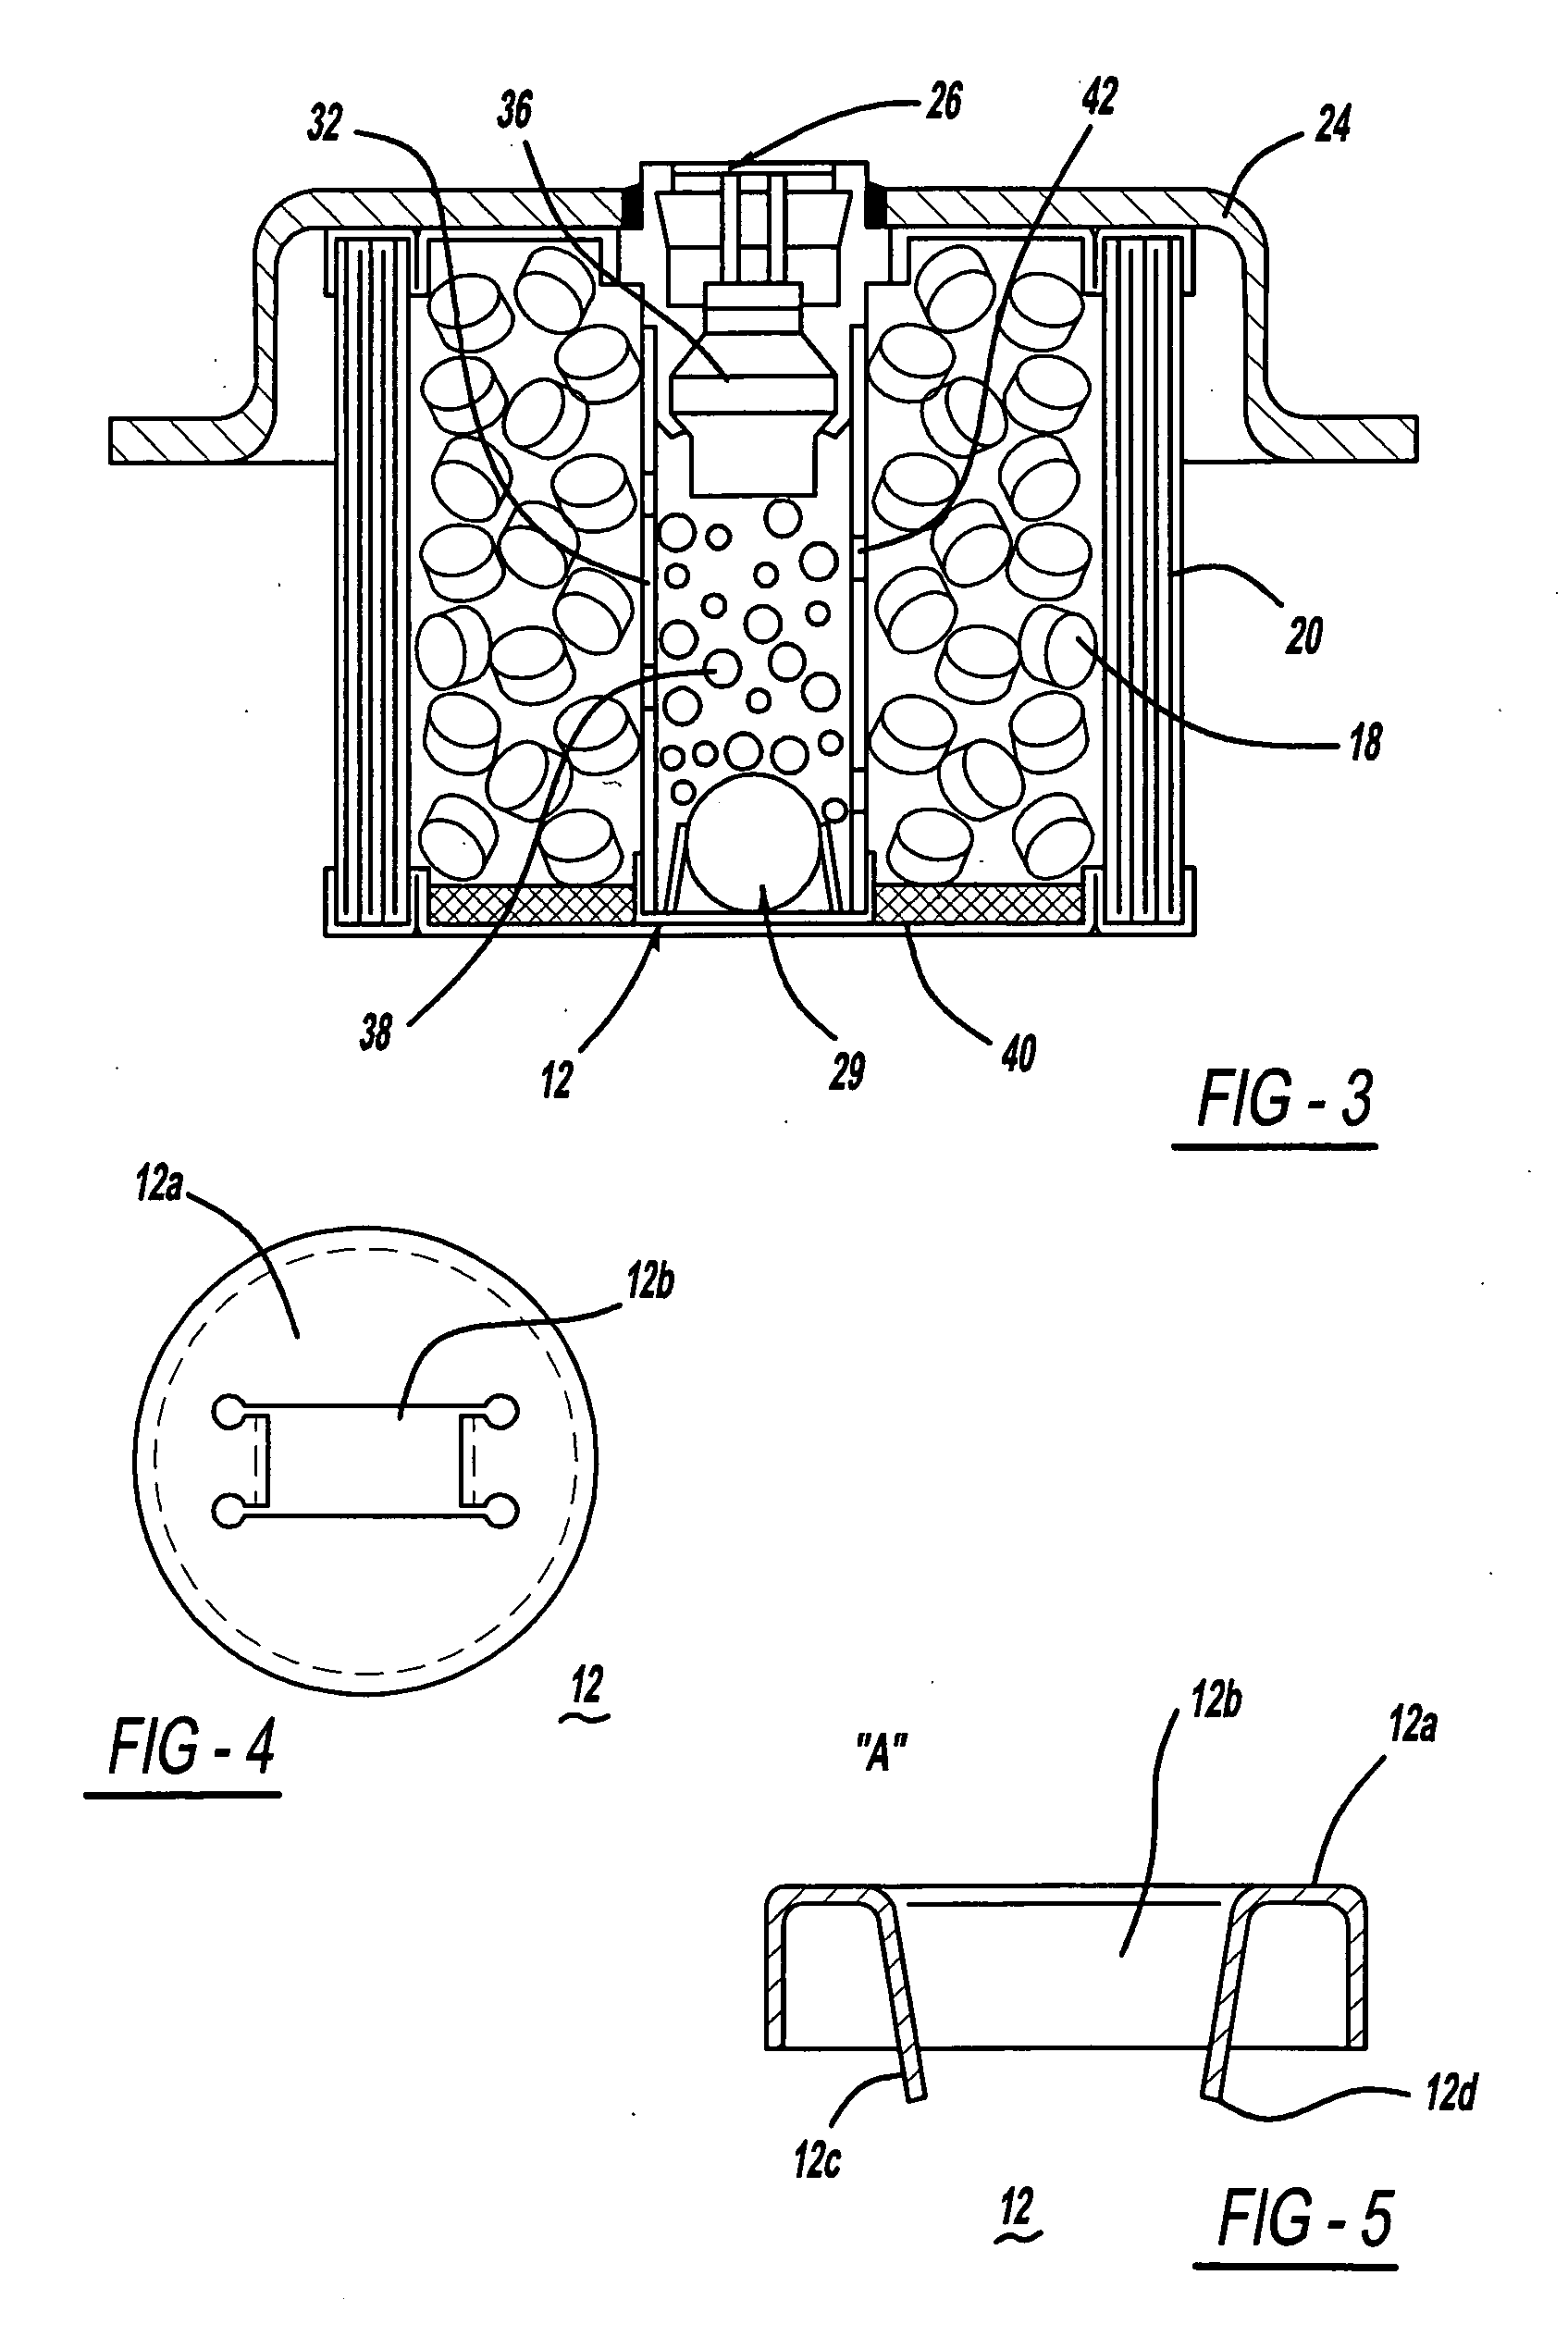 Inflator with an auto-ignition cradle